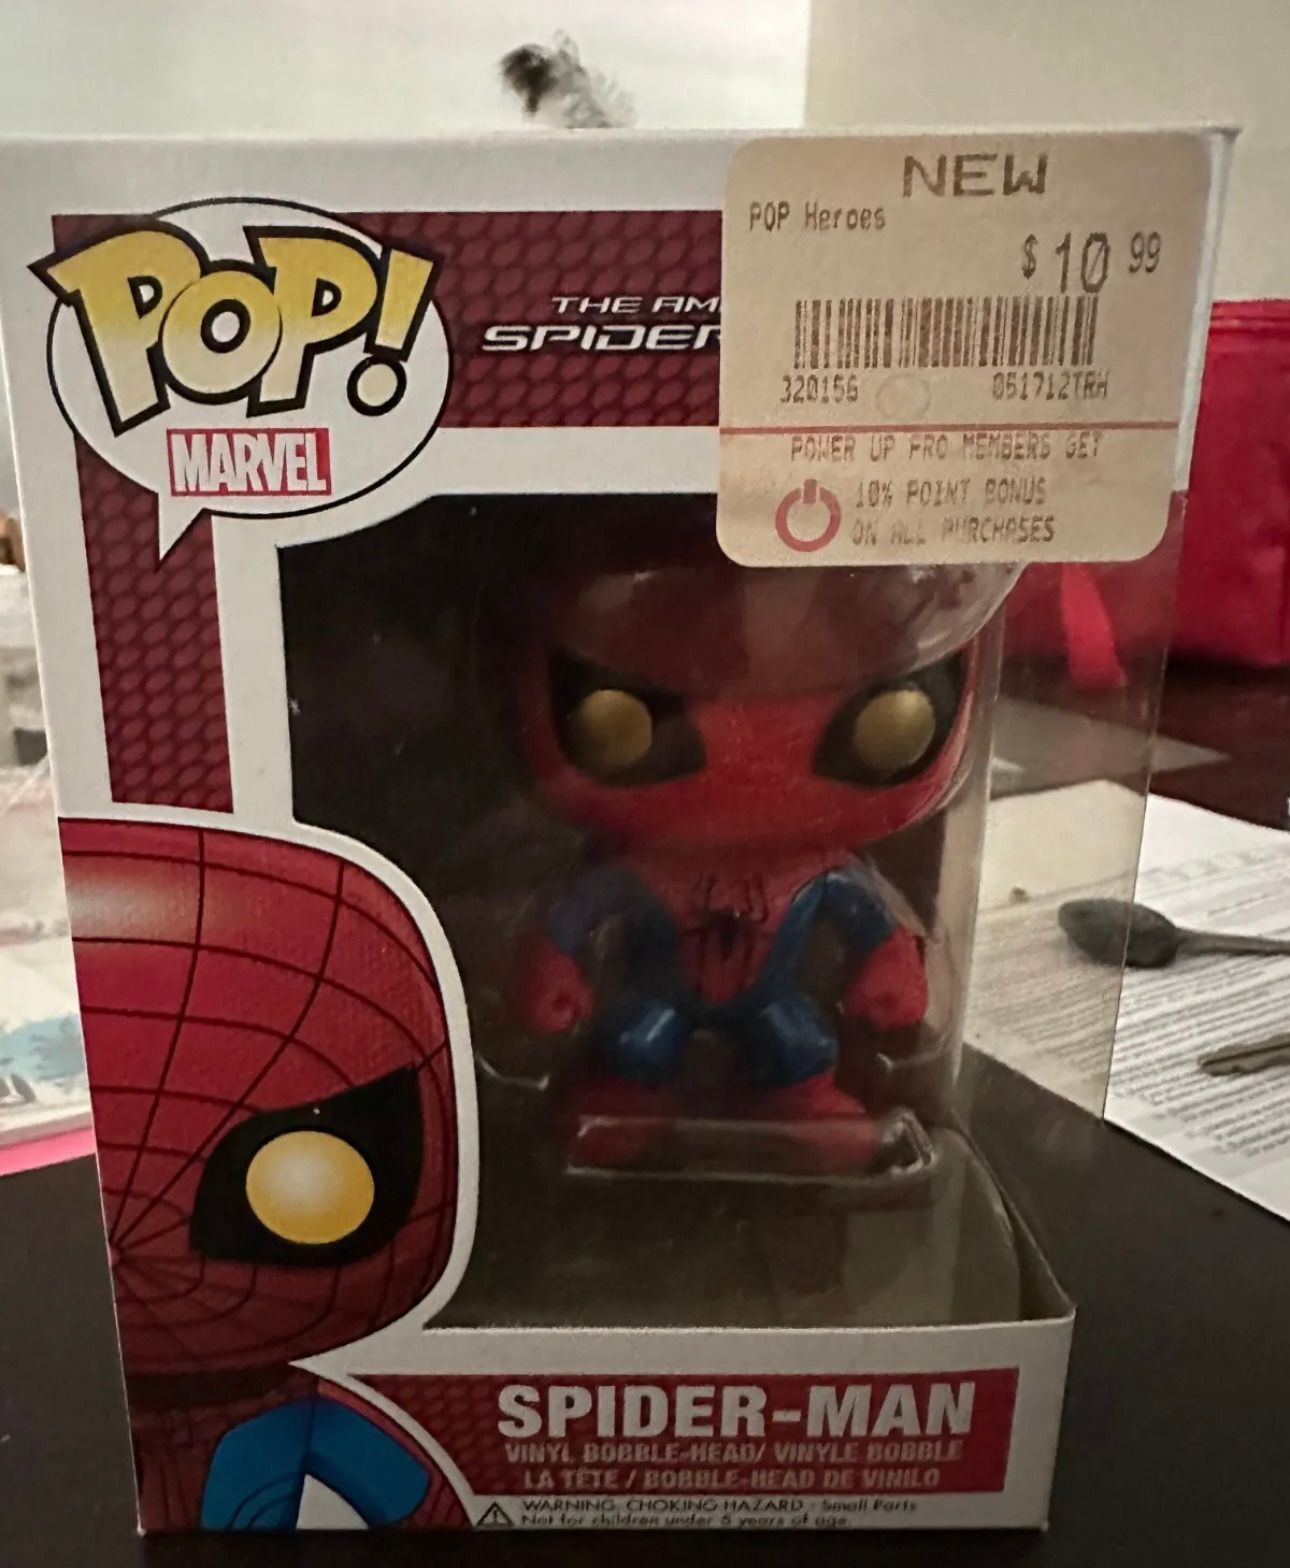 The Amazing Spiderman #15 Funko Pop (Andrew Garfield) with pop protector